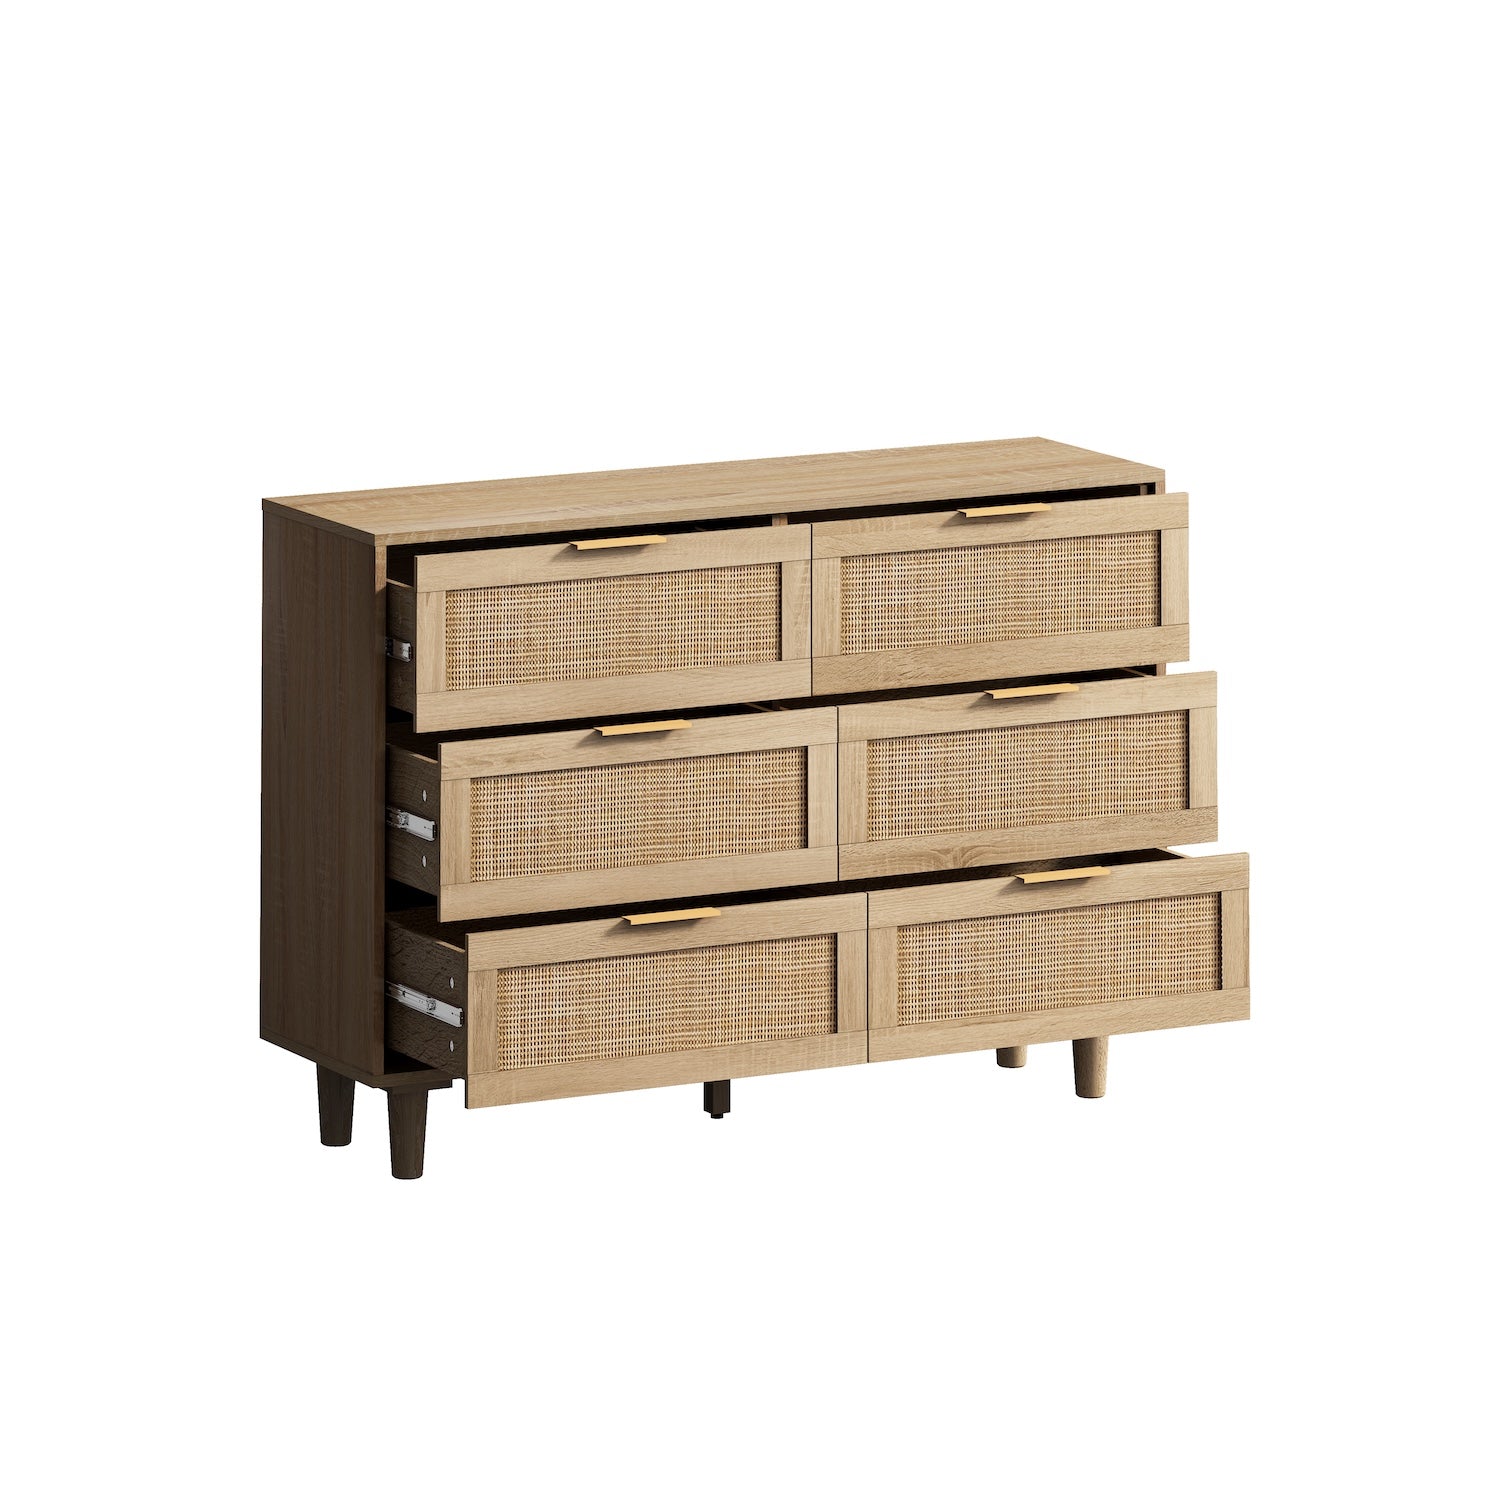 Danita 6-Drawer Cabinet in Natural Finish with Rattan Drawer Fronts